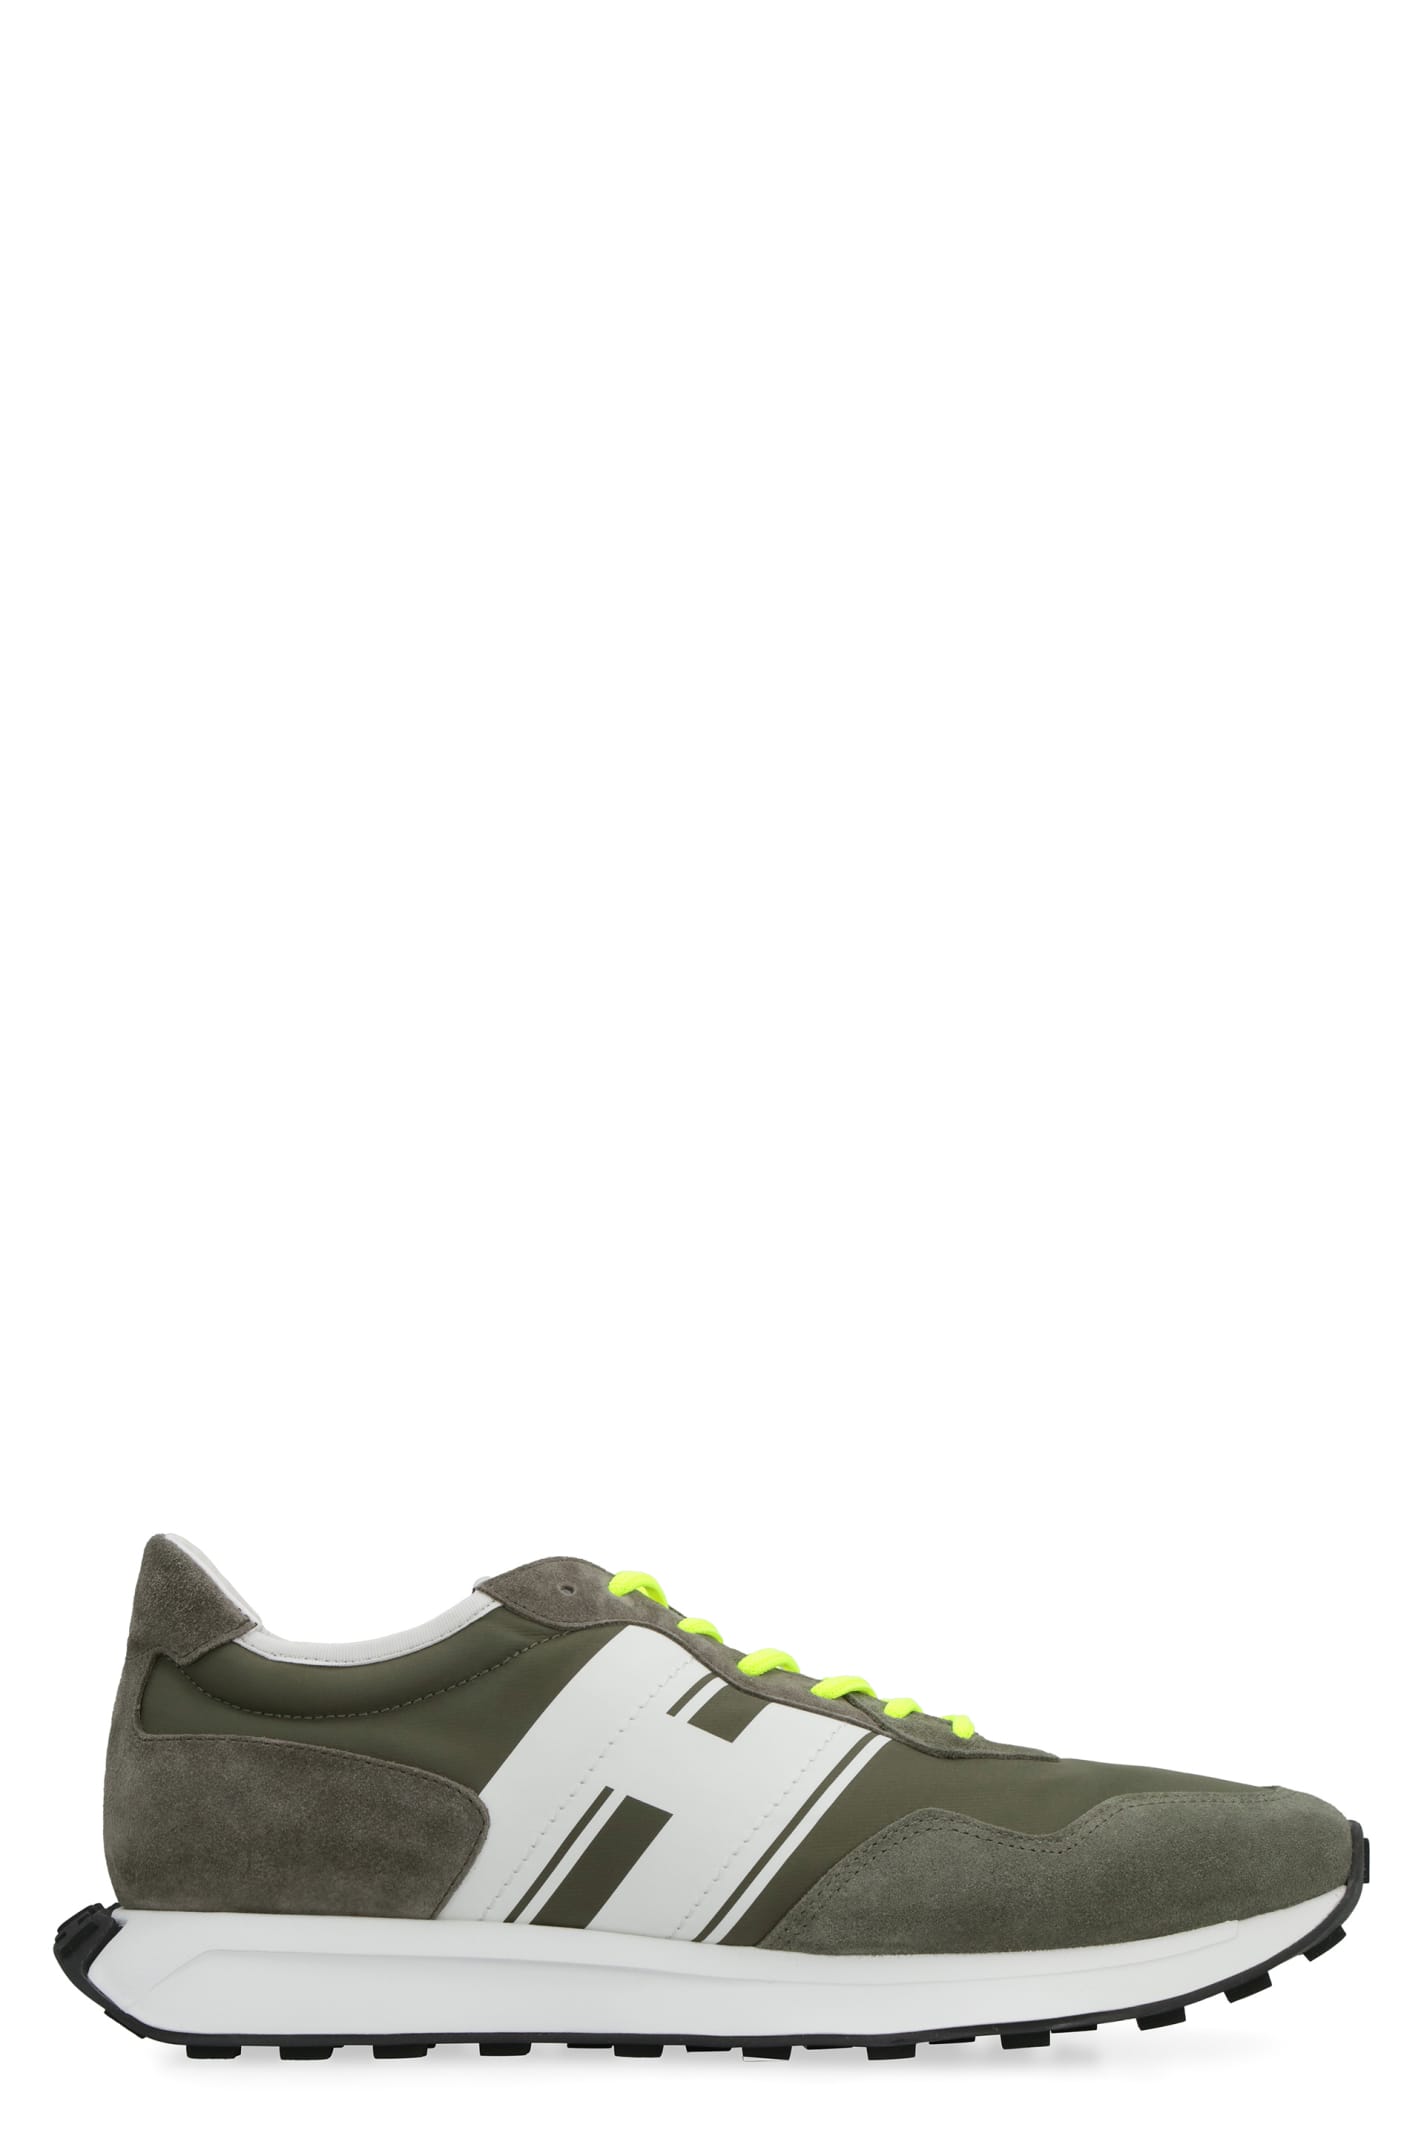 Hogan H601 Leather Trainers In Green